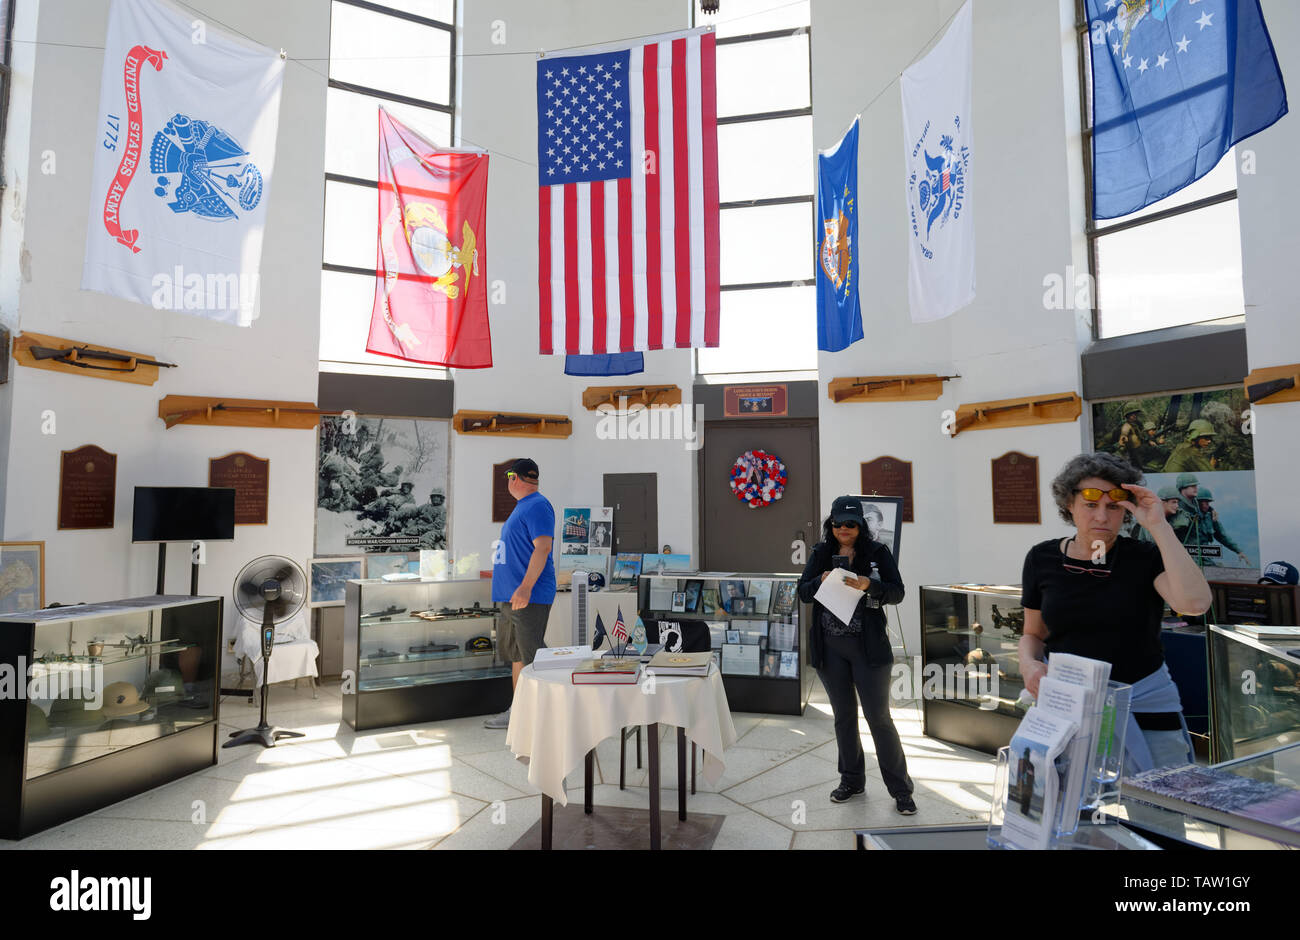 East Meadow, New York, USA. 25th May, 2019. Visitors at the Nassau County Veterans Memorial Museum look at miliary memorabilia displayed under the American Flag and military flags of the United States Armed Forces - Army, Navy, Marine Corps, Air Force, Coast Guard - suspended high in the ceiling, during Saturday of Memorial Day Weekend at Eisenhower Park on Long Island. Credit: Ann Parry/ZUMA Wire/Alamy Live News Stock Photo